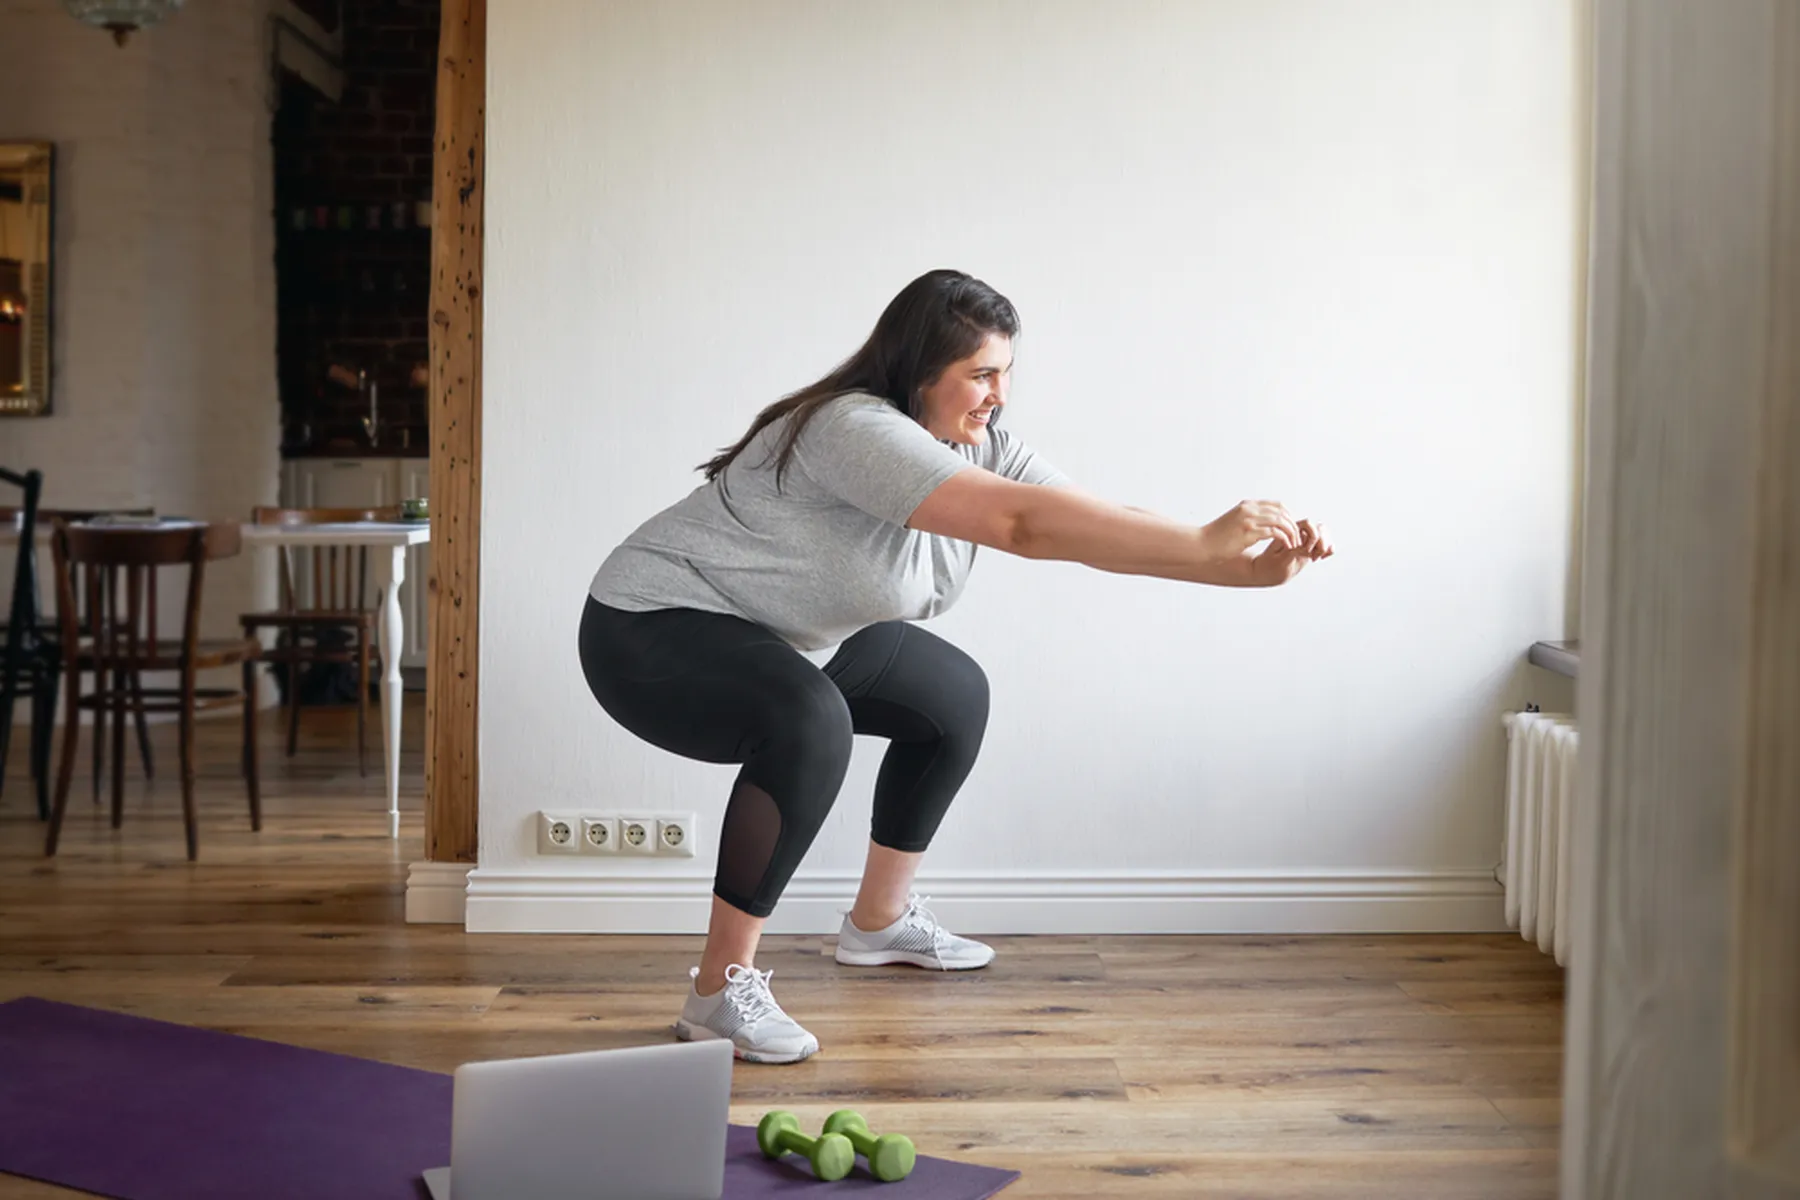 A woman in a grey t-shirt and black workout pants does a squat as she straightens her arms out in front of her. 